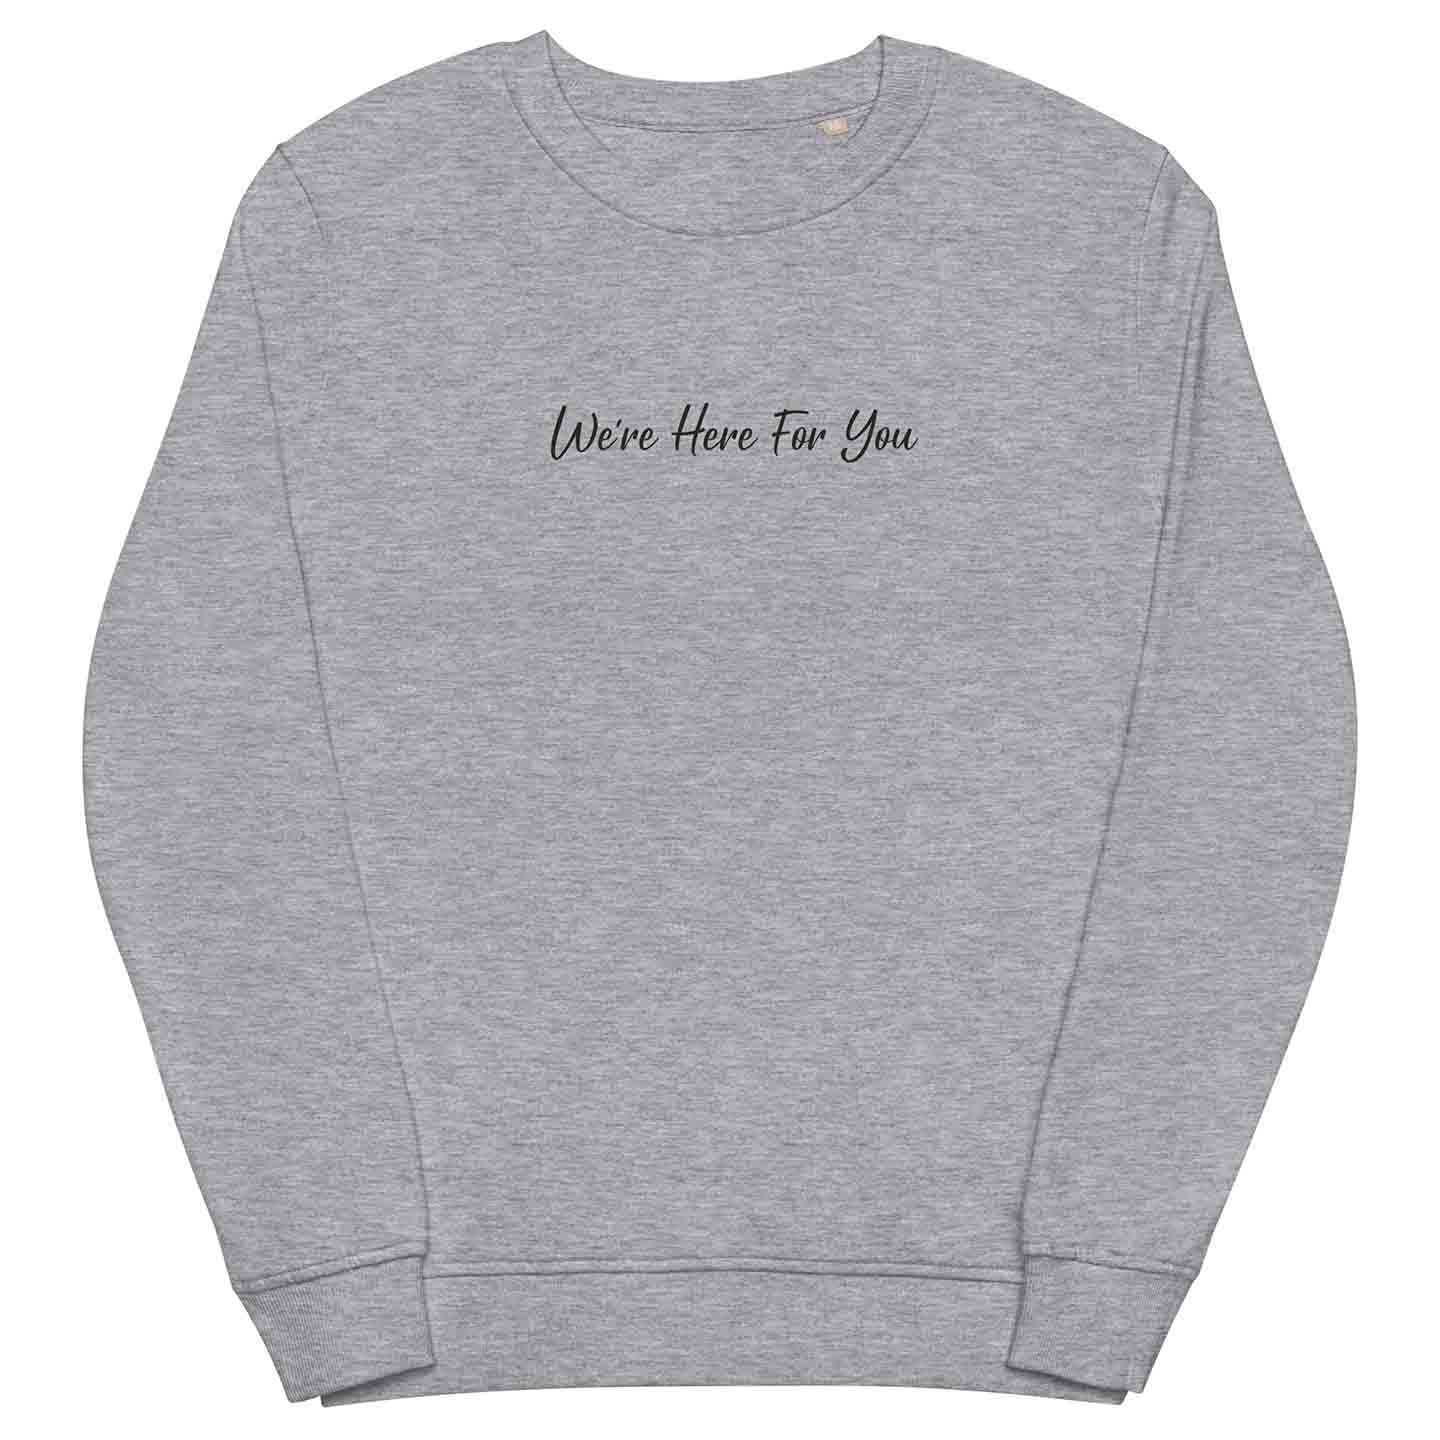 Men light gray positive sweatshirt with inspirational quote, "We Are Here For You."